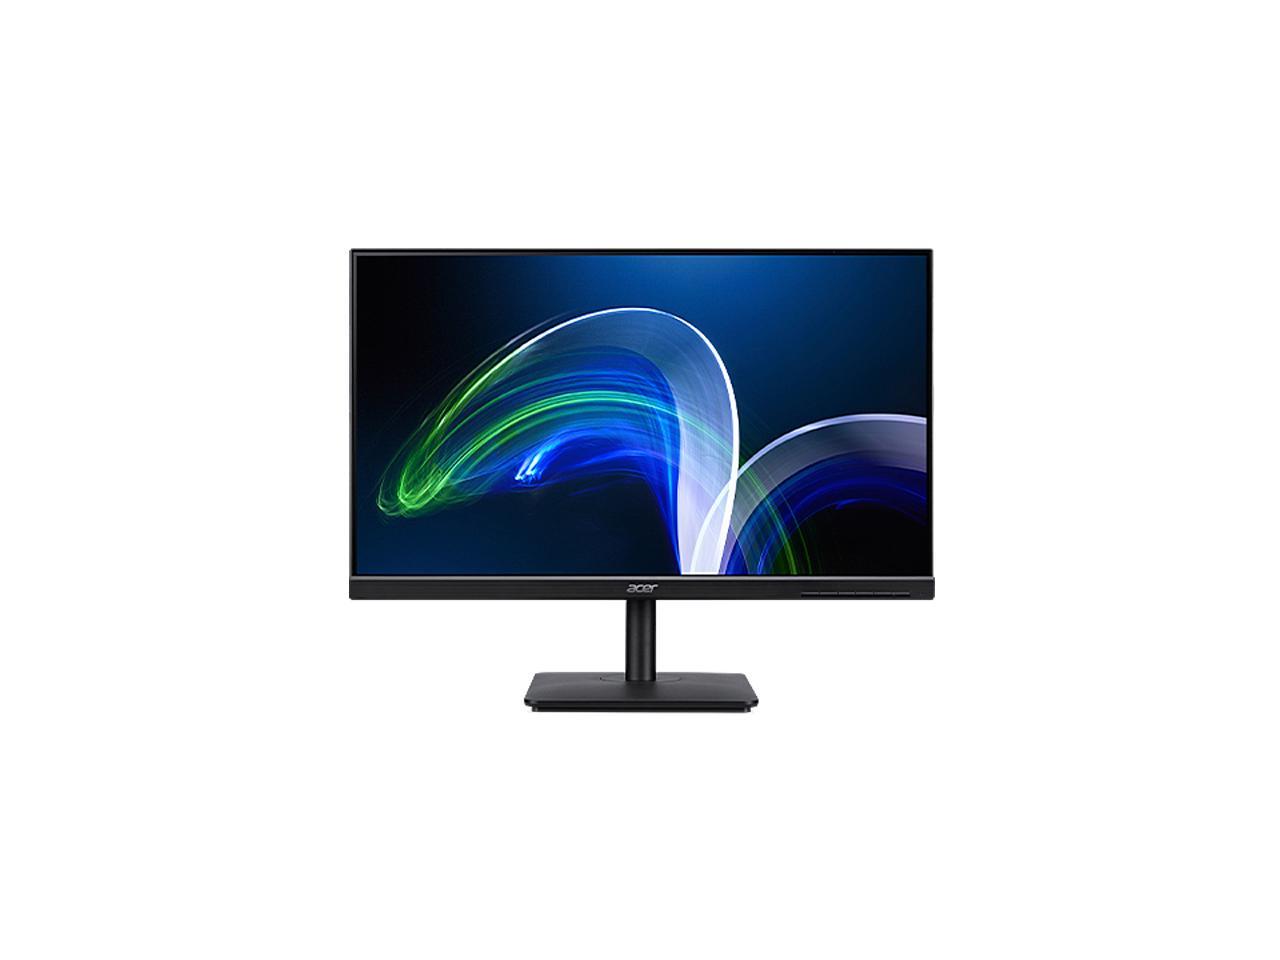 Acer VA241Y 24" (23.8" Viewable) Full HD LED LCD Monitor - 16:9 - Black - Vertical Alignment (VA) - 1920 x 1080 - 16.7 Million Colors - 250 Nit - 4 ms - 75 Hz Refresh Rate - HDMI - VGA - image 2 of 9